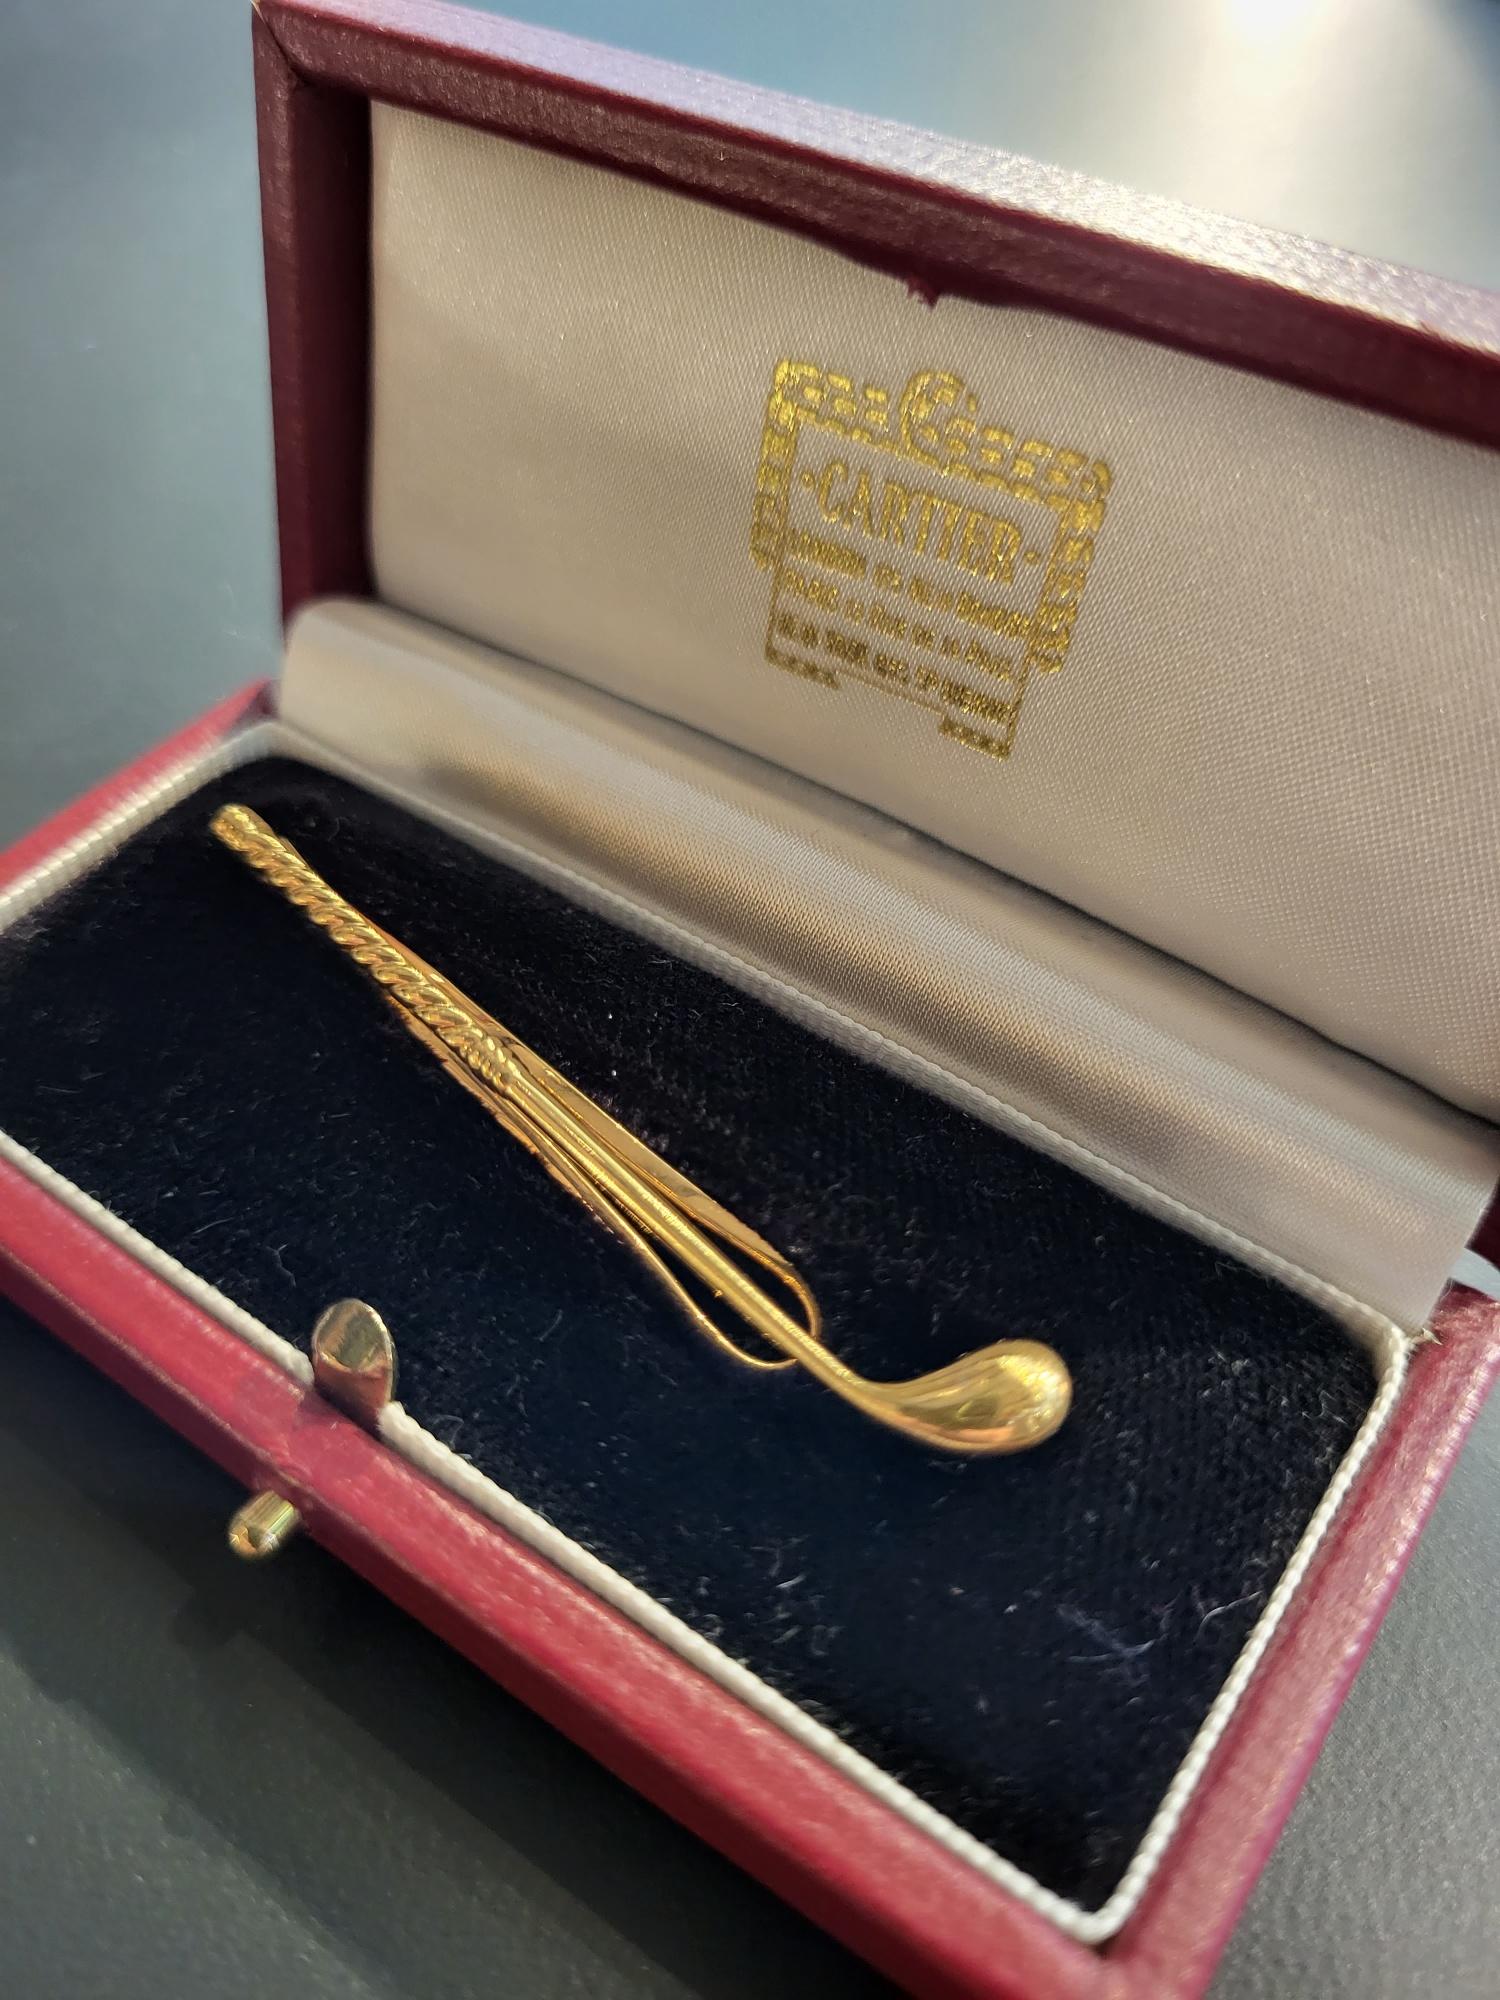 Cartier, Paris

An 18 carat gold tie clip in the form of a stylized 'Wedge' golf club, with twisted rope-style grip. Hand engraved 'Cartier Paris' to the reverse and twice struck with French poinçon marks and numbered ‘P9853‘.

The clip is set